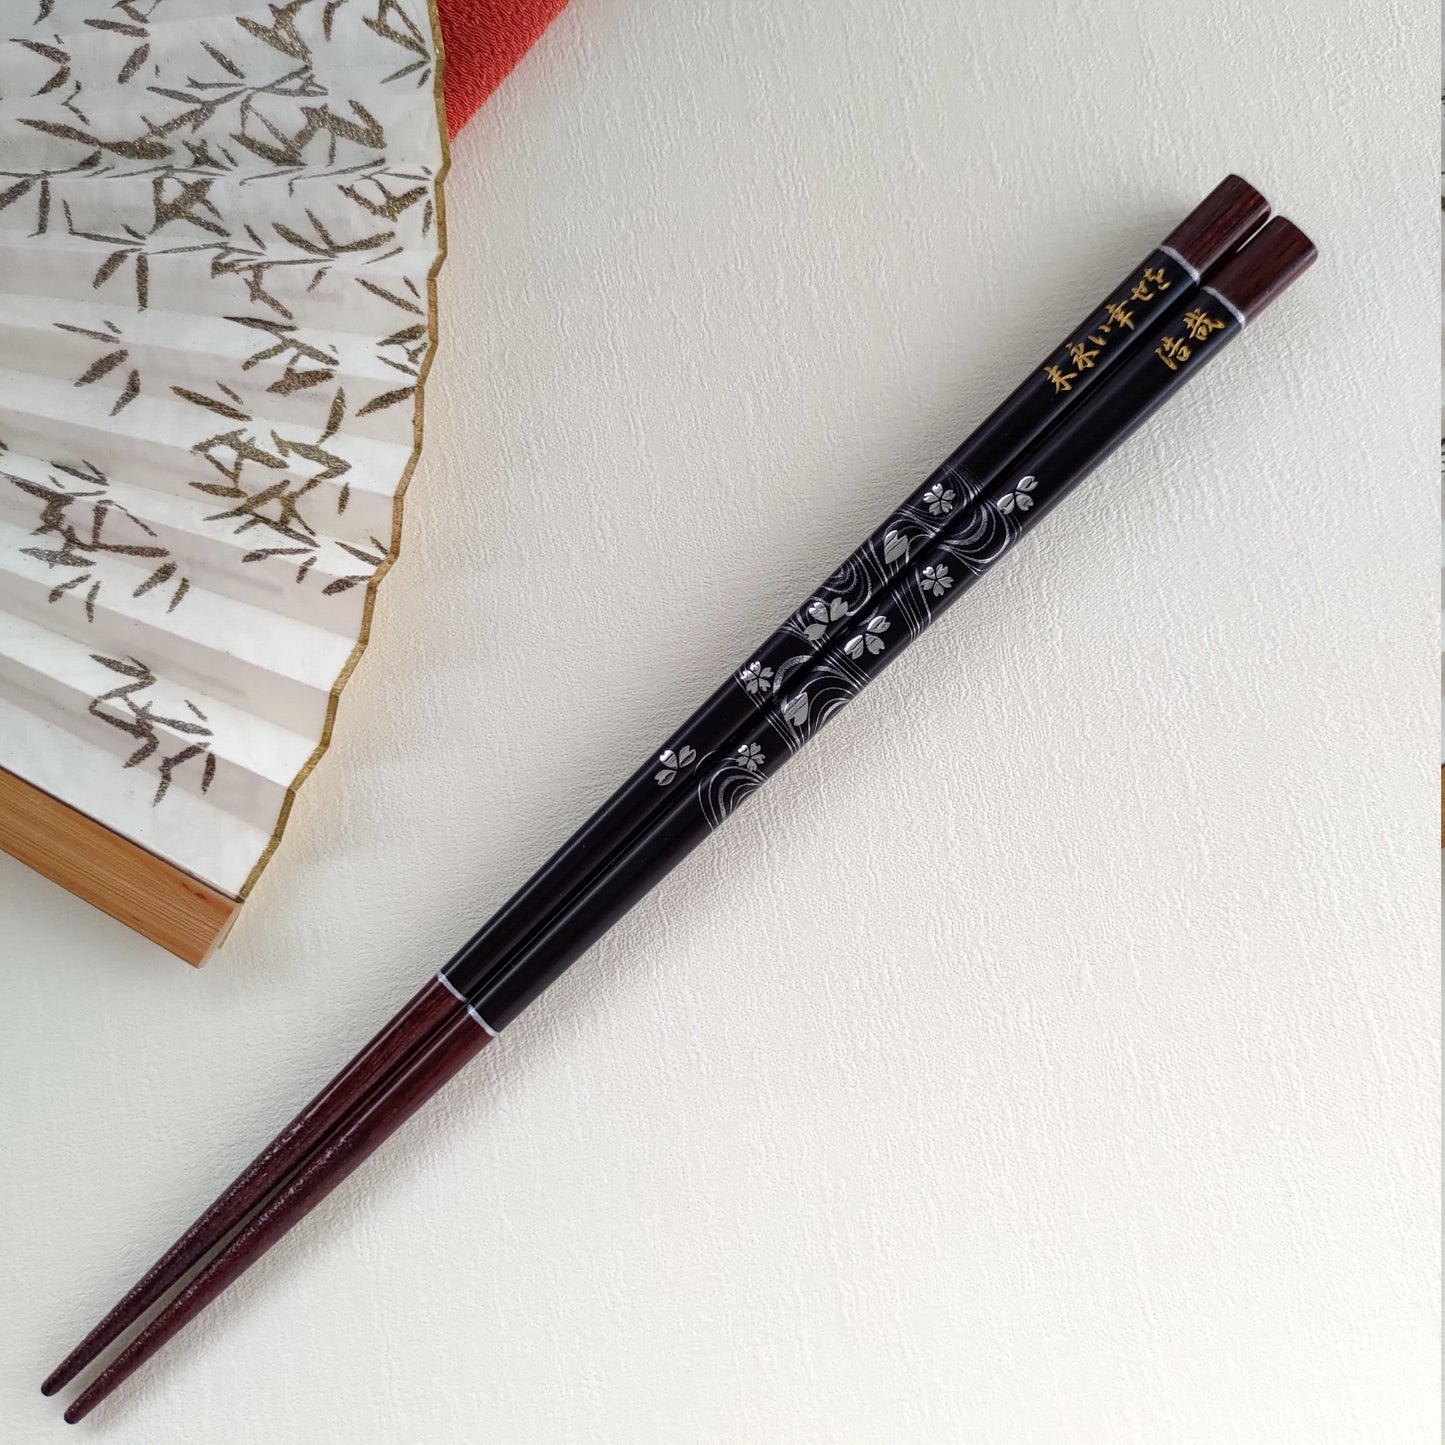 Elegant Japanese chopsticks with cherry blossoms on river stream black red - DOUBLE PAIR